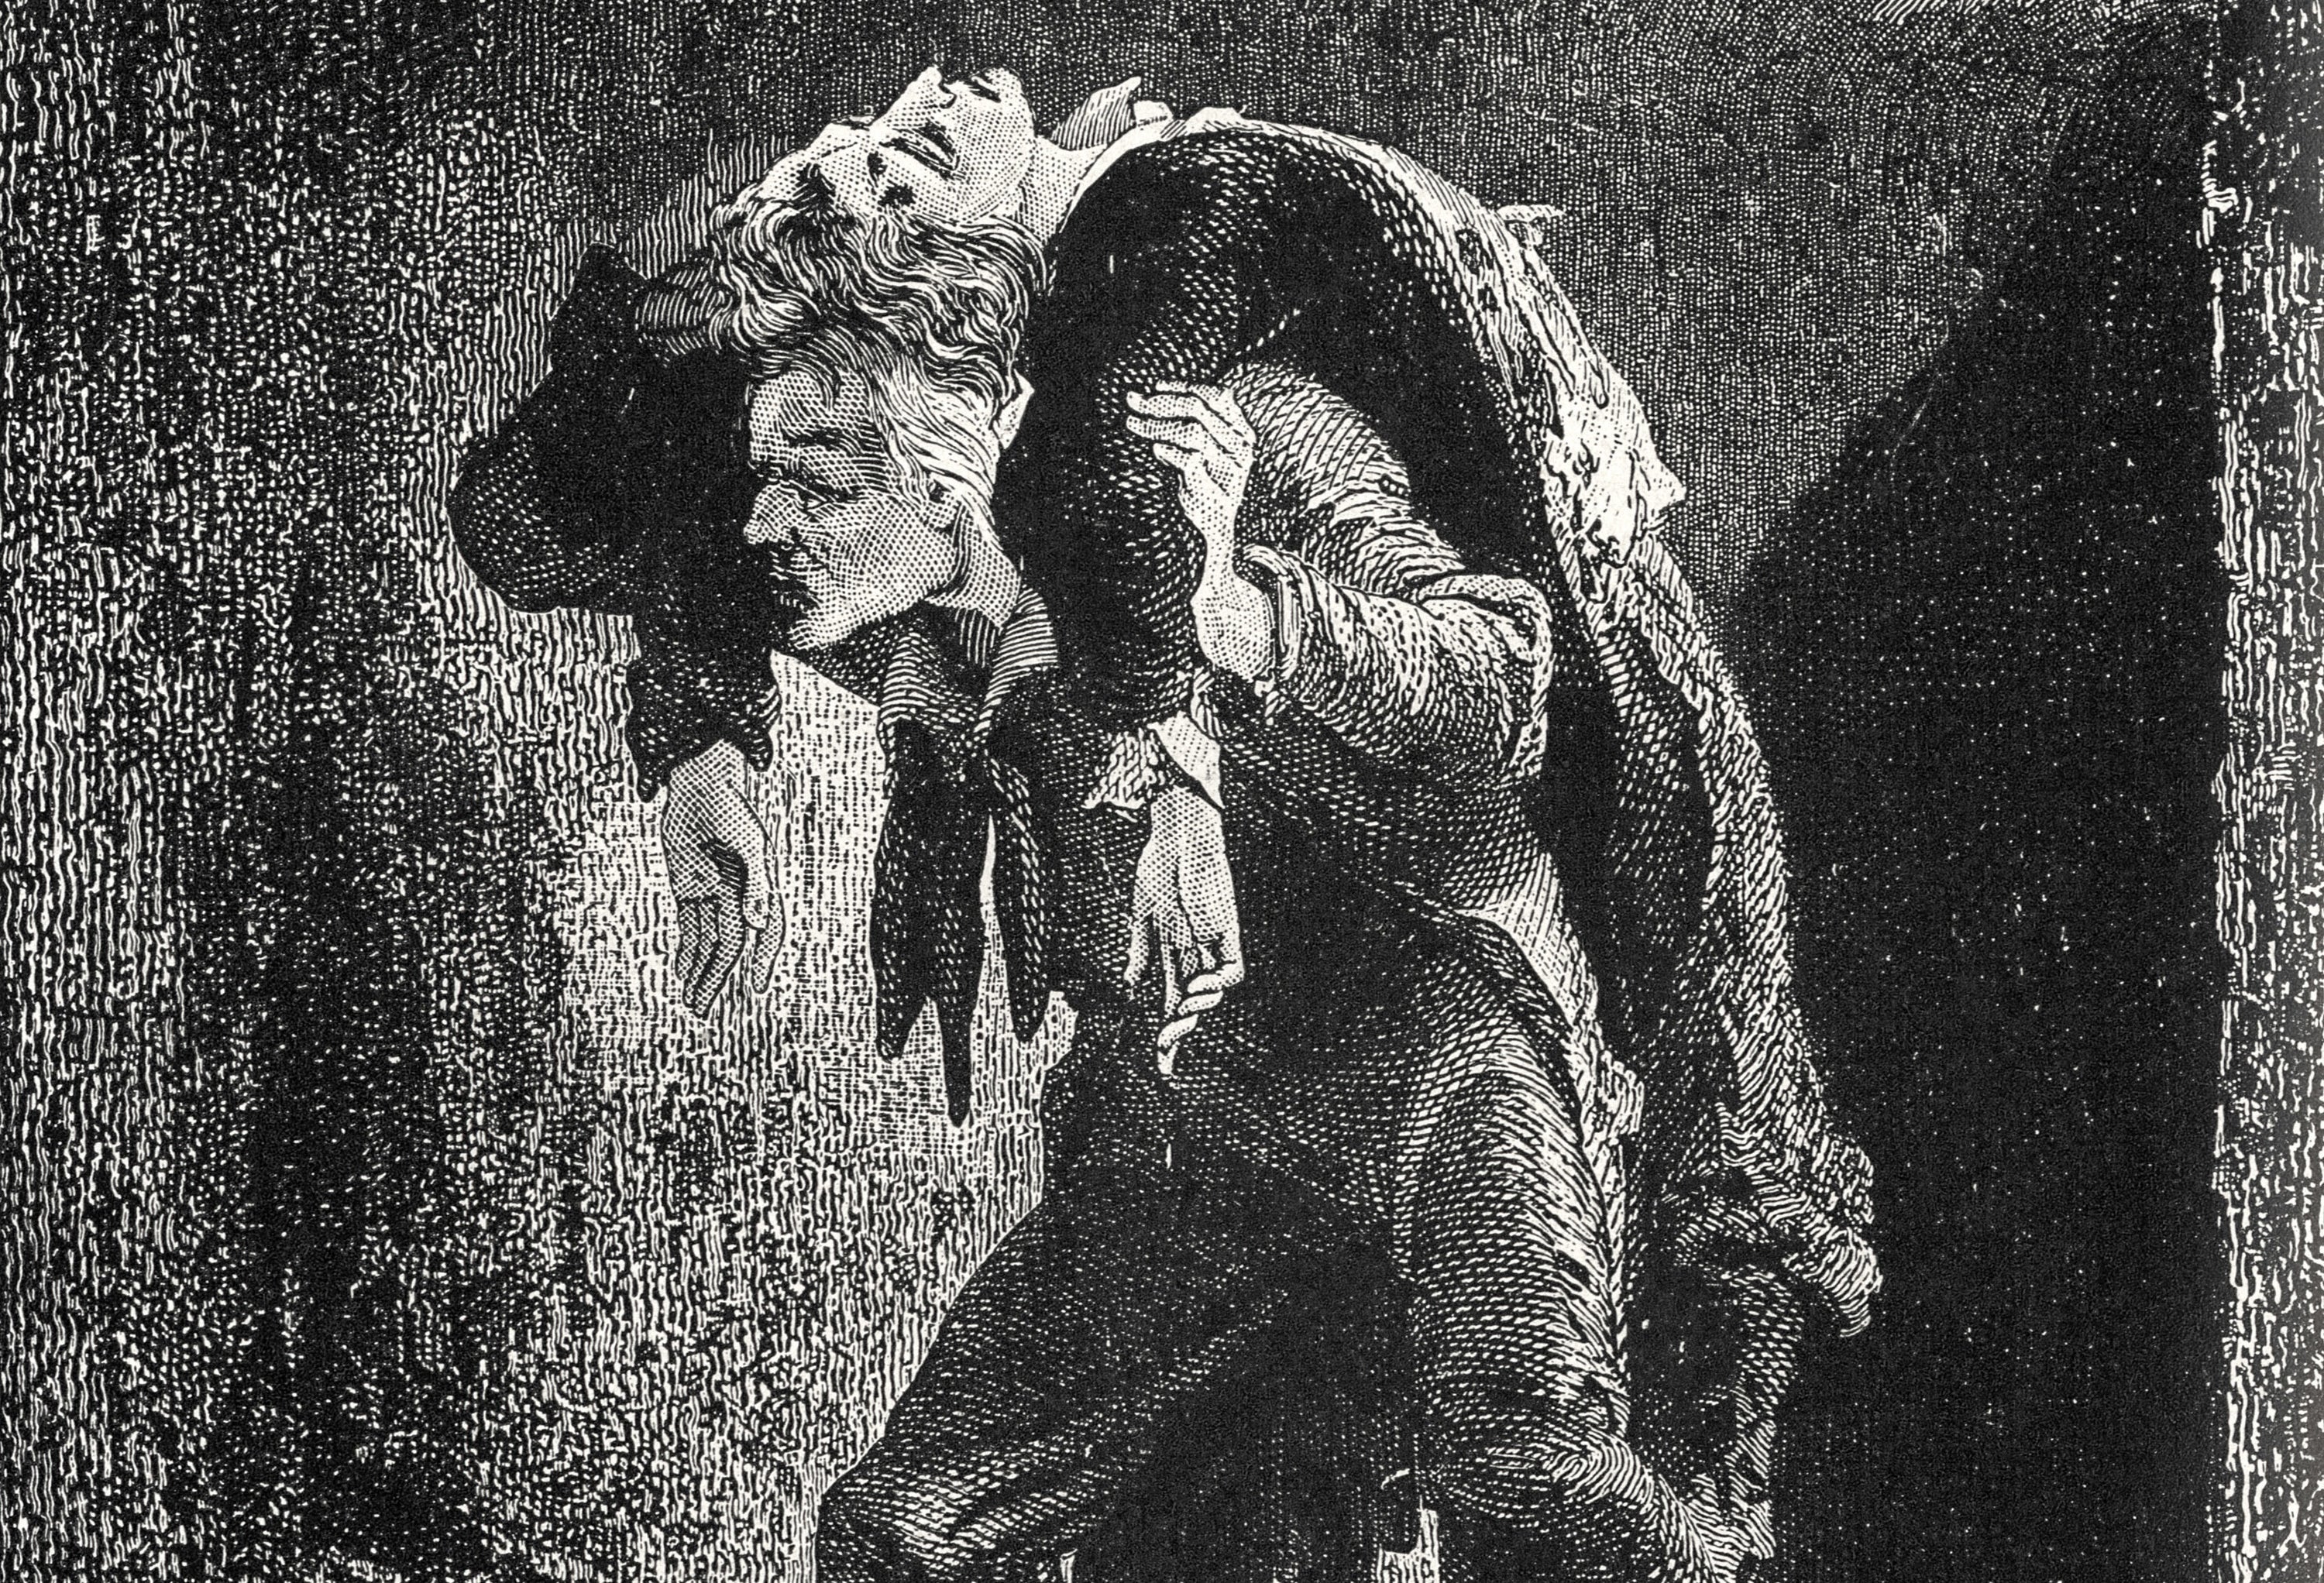 A drawing of Jean Valjean carrying Marius from Les Misérables